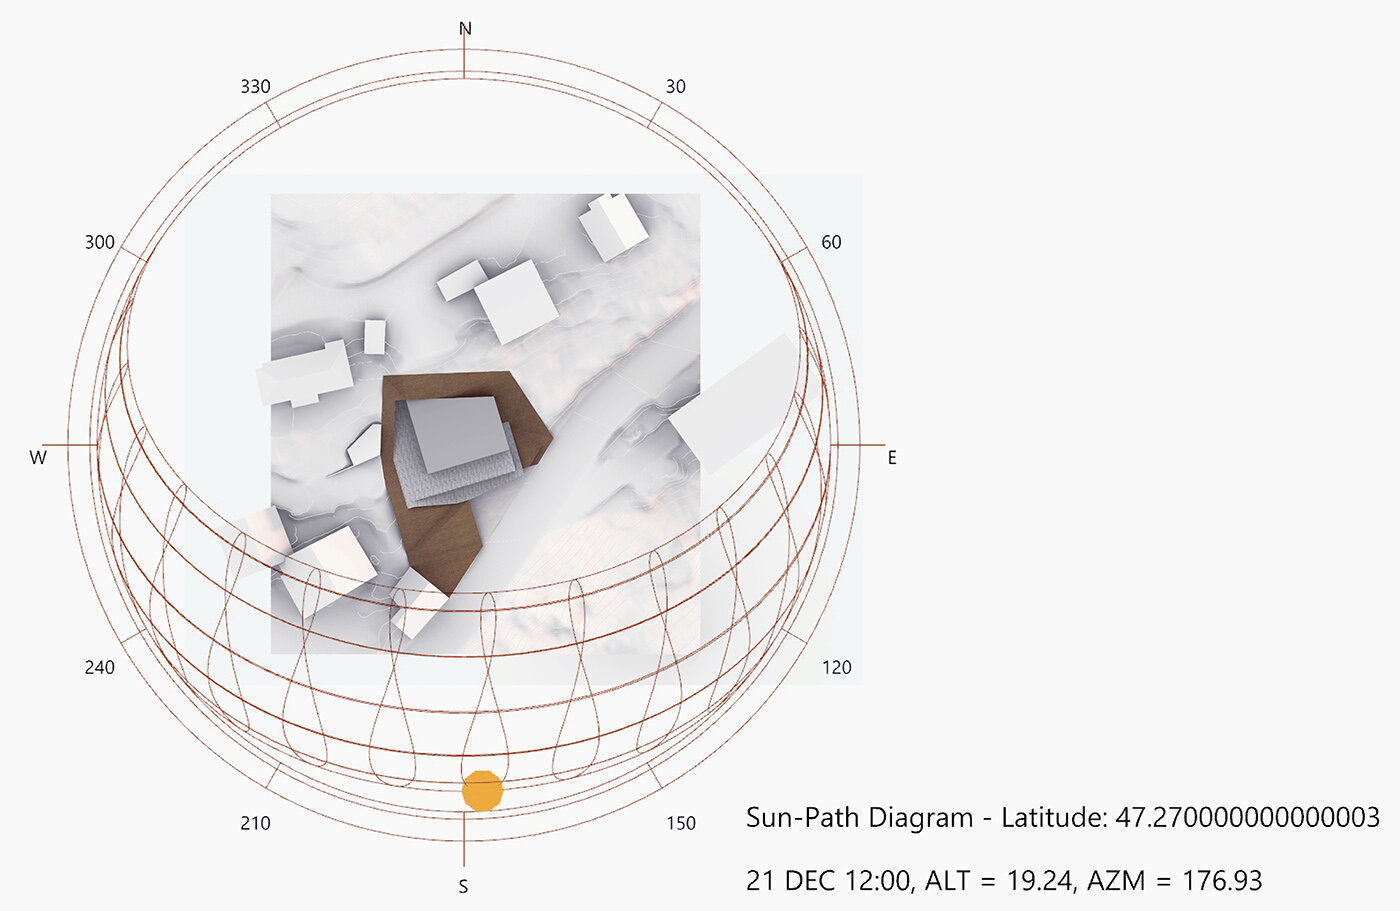 Annual sun-path diagram for the specific site location. The building is orientet to maximise sunlight exposure. 